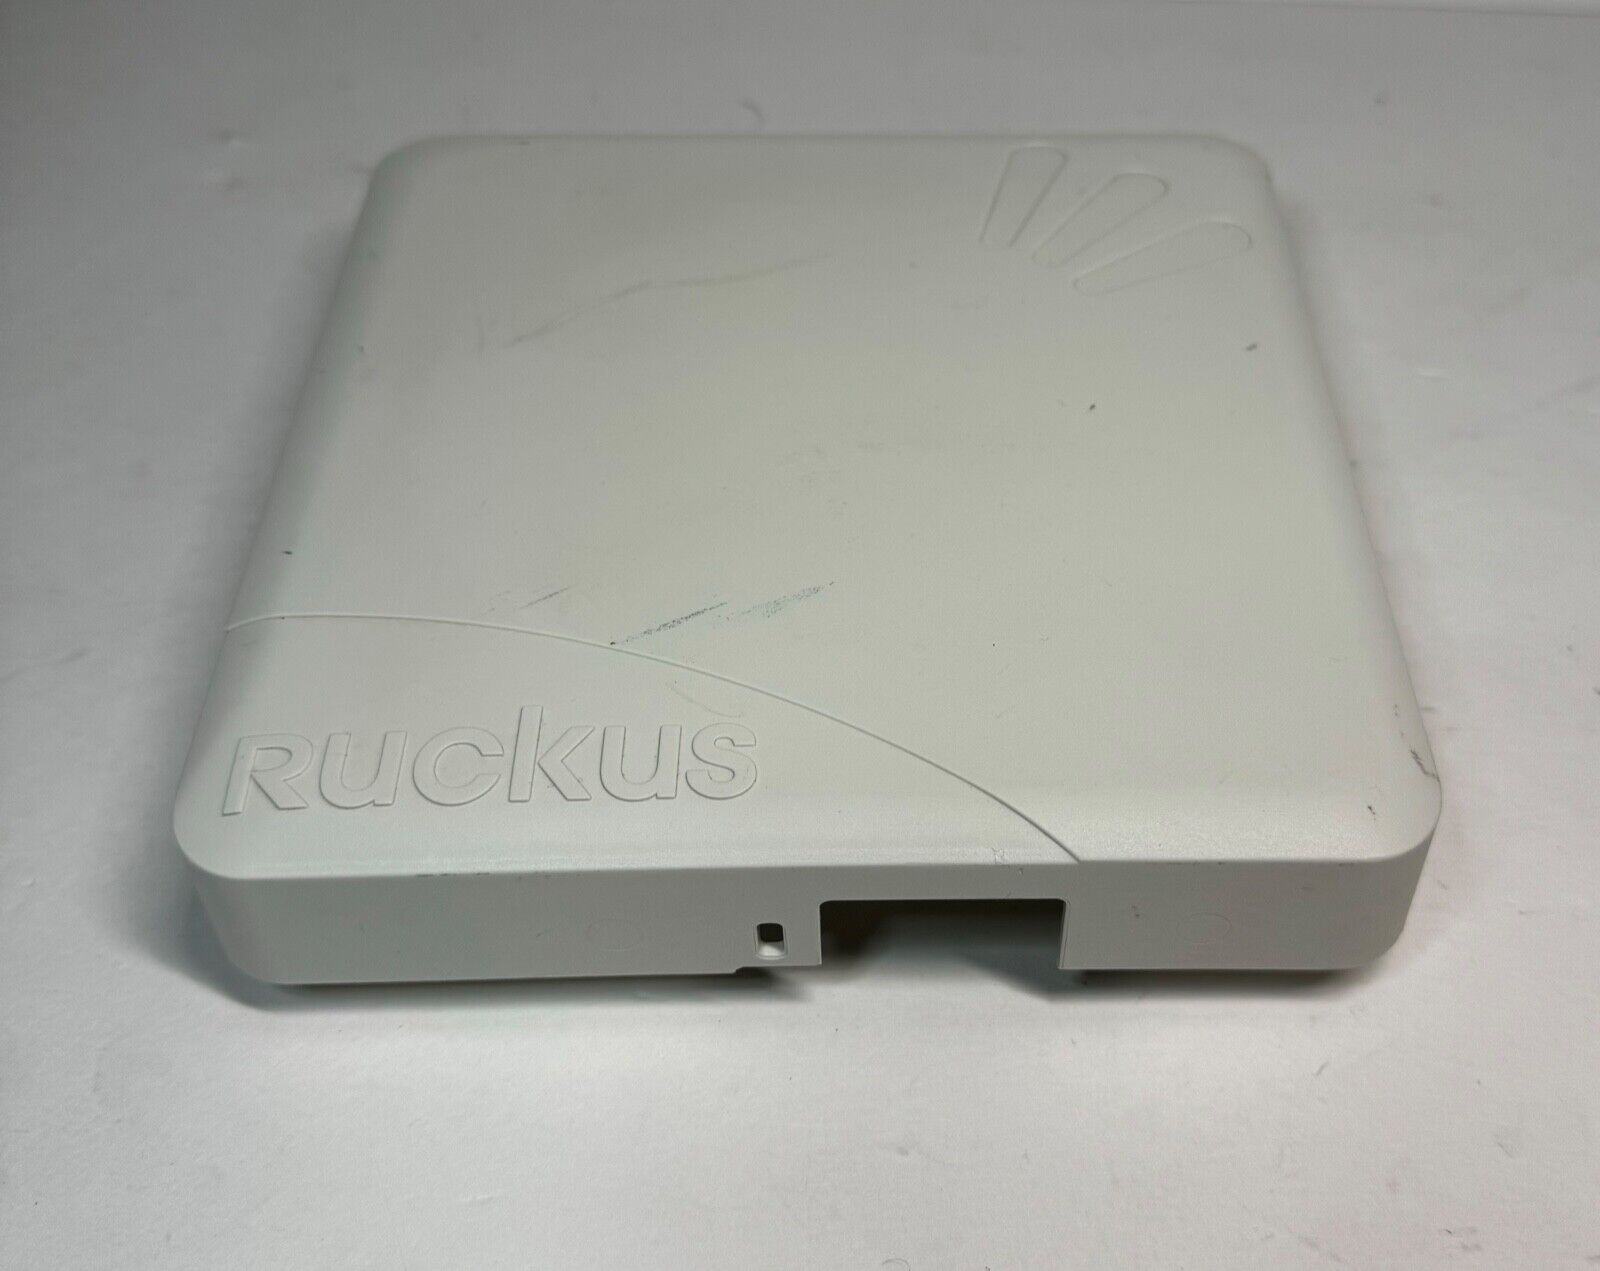 LOT of 3 Ruckus ZoneFlex 7372 Dual-Band 802.11n Wireless Access Point